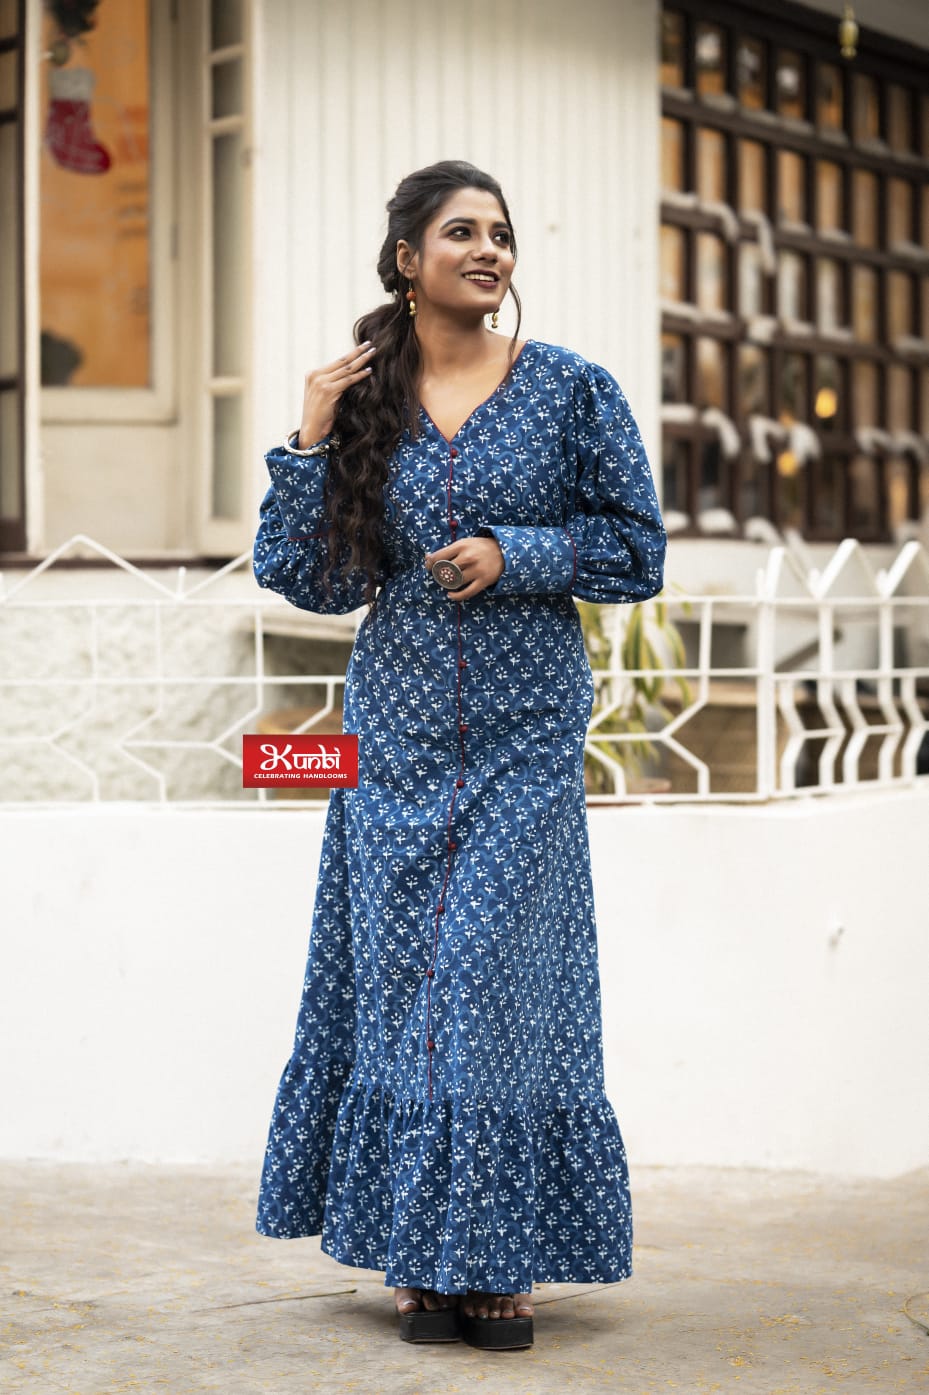 How to wear saree on denim | Dolly Jain's saree draping style for farewell  party | Look modern in this style of saree draping. Wear saree on jeans/ denim and a crop top